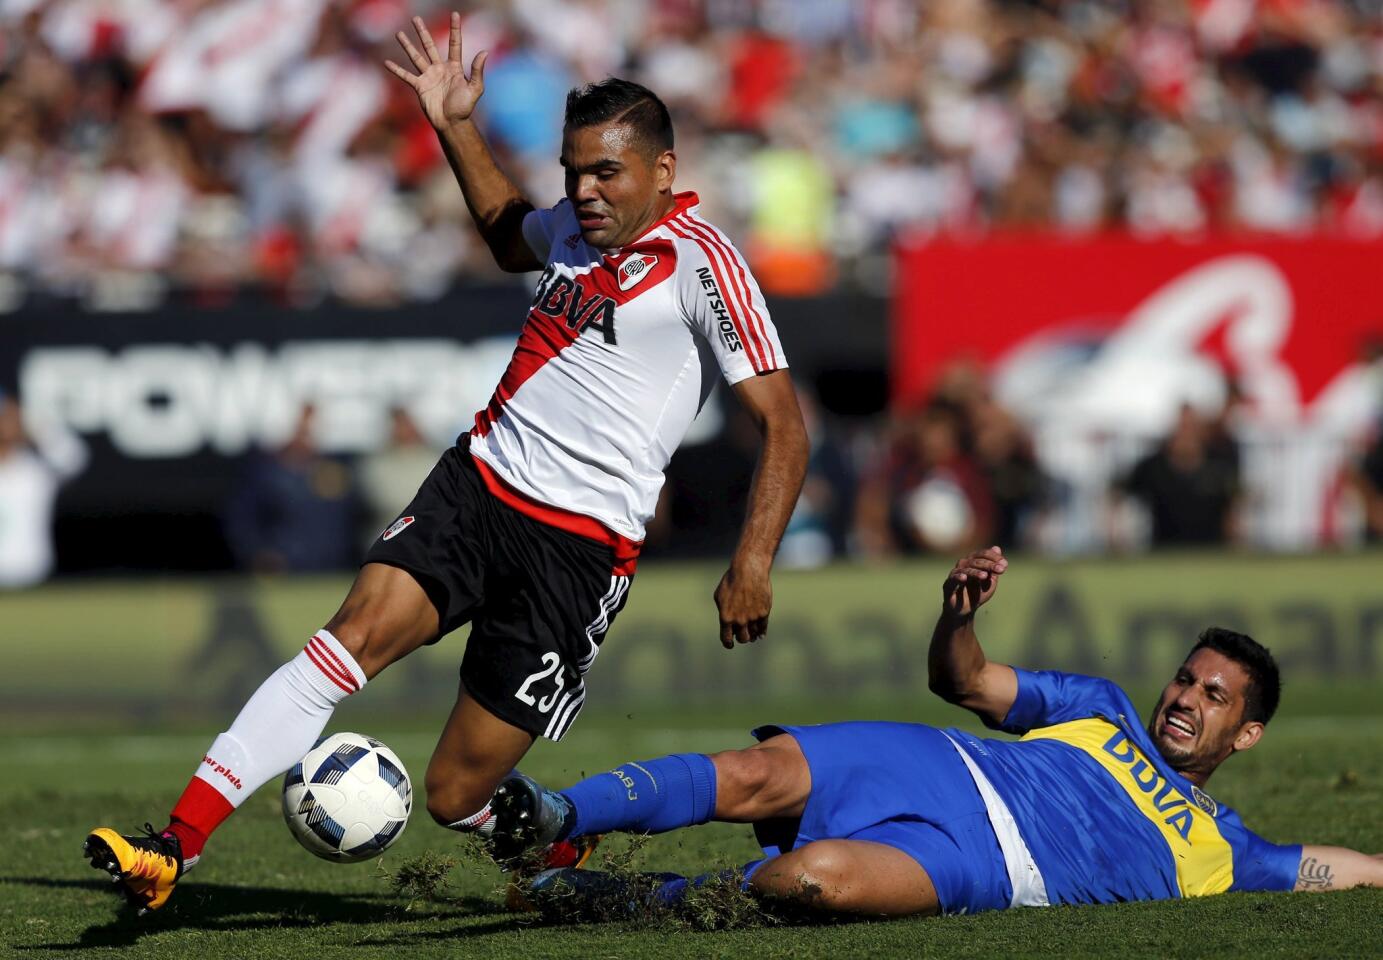 Football Soccer - River Plate vs Boca Juniors - Argentine First Division - Antonio Liberti stadium, Buenos Aires, Argentina 6/3/16. River Plate's Gabriel Mercado in action against Boca Juniors' Jonathan Silva. REUTERS/Marcos Brindicci ** Usable by SD ONLY **